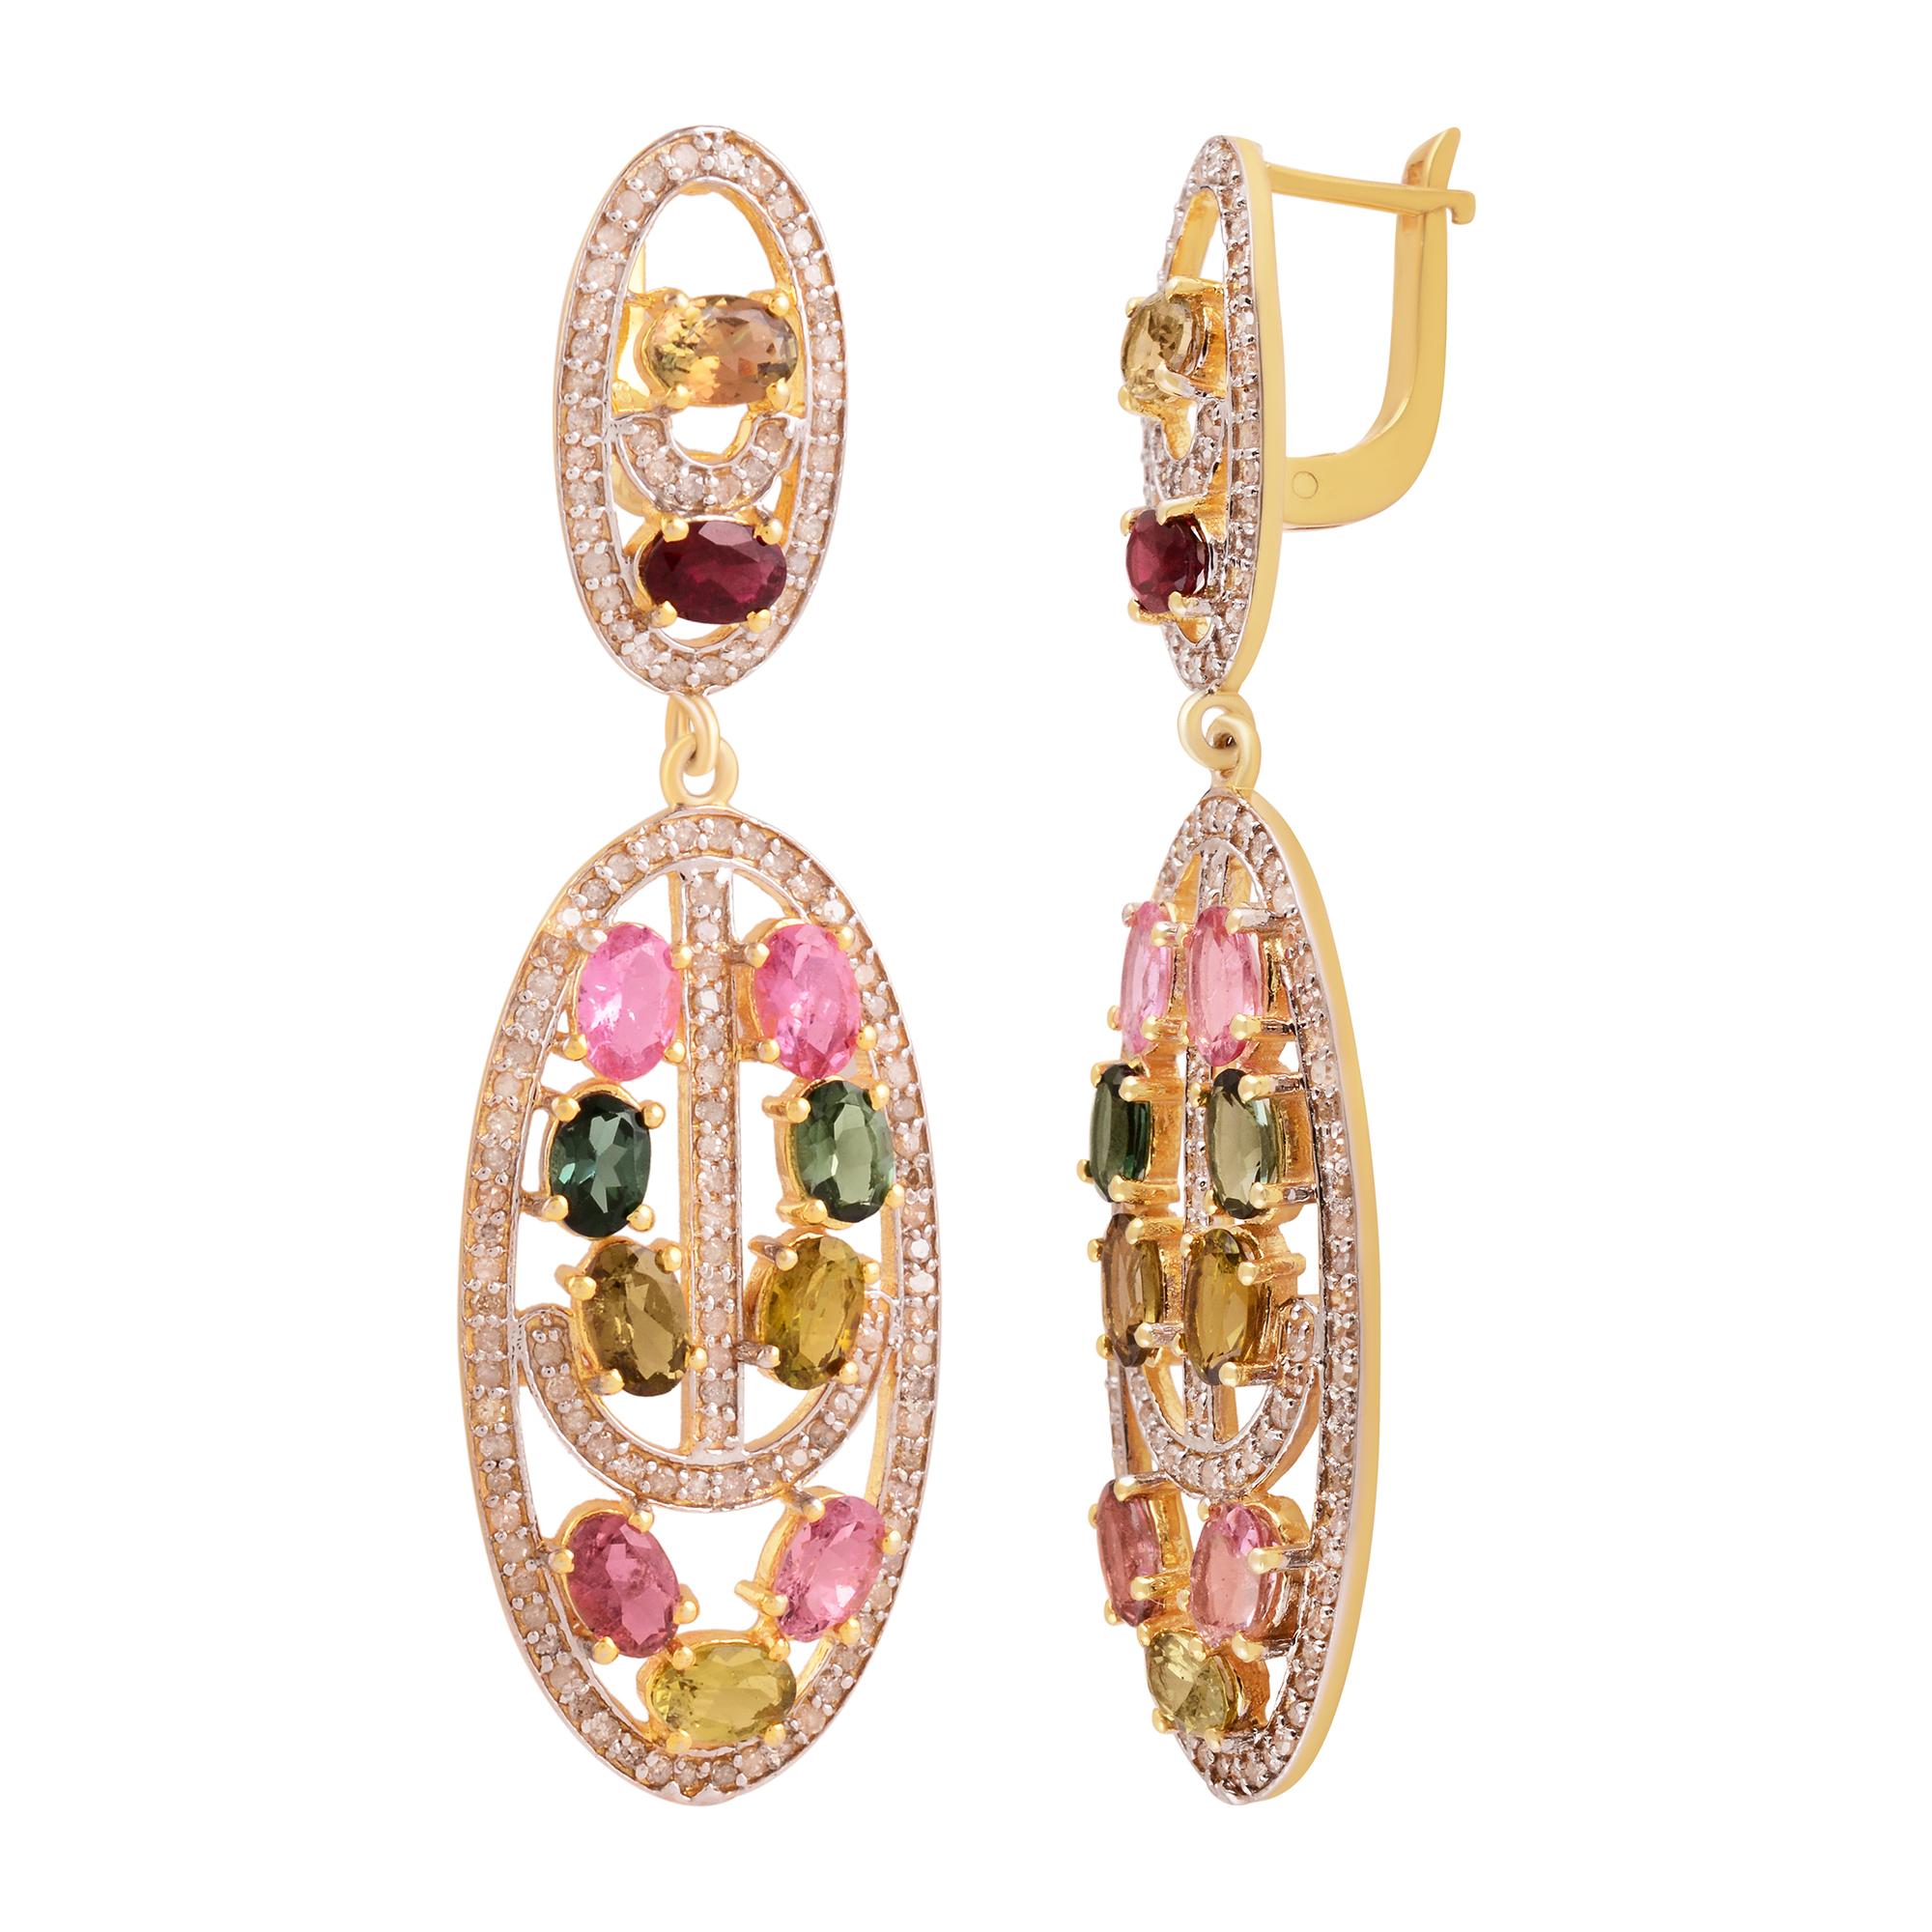 Cast from 14K gold & sterling silver, these beautiful drop earrings are hand set in 12.40 carats tourmaline and 1.47 carats of sparkling diamonds.

FOLLOW  MEGHNA JEWELS storefront to view the latest collection & exclusive pieces.  Meghna Jewels is